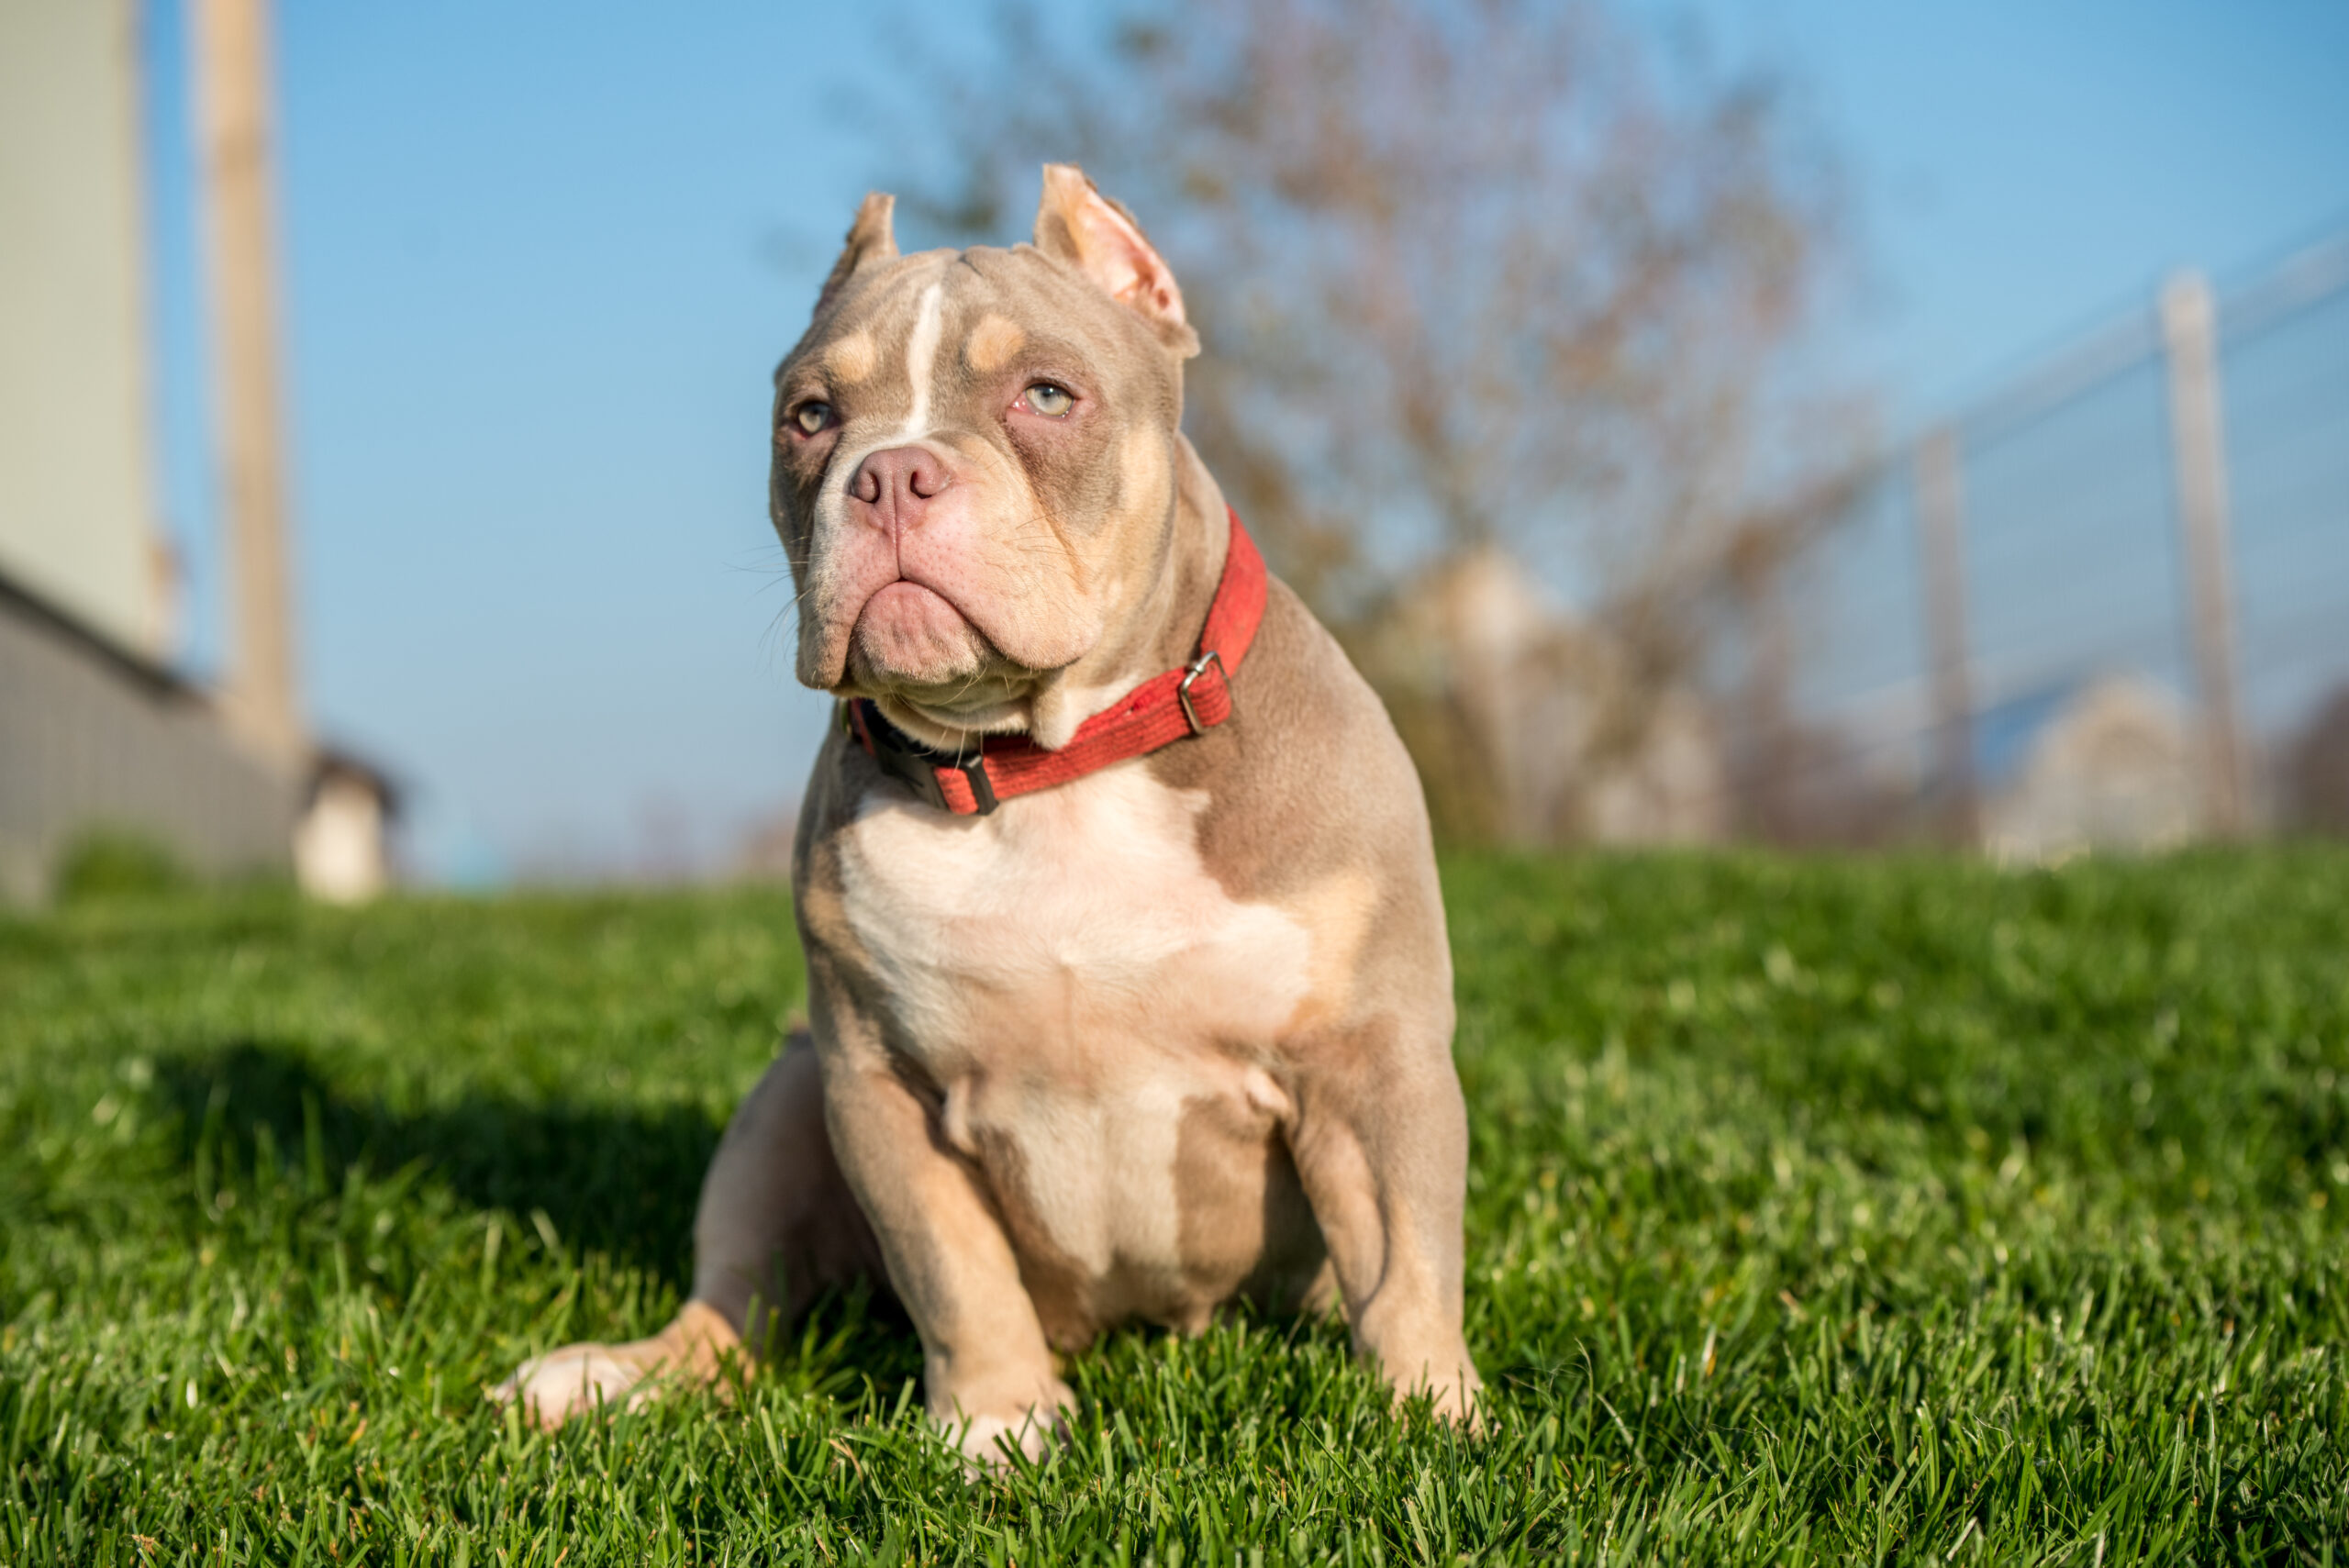 A pocket male American Bully puppy dog sitting on grass